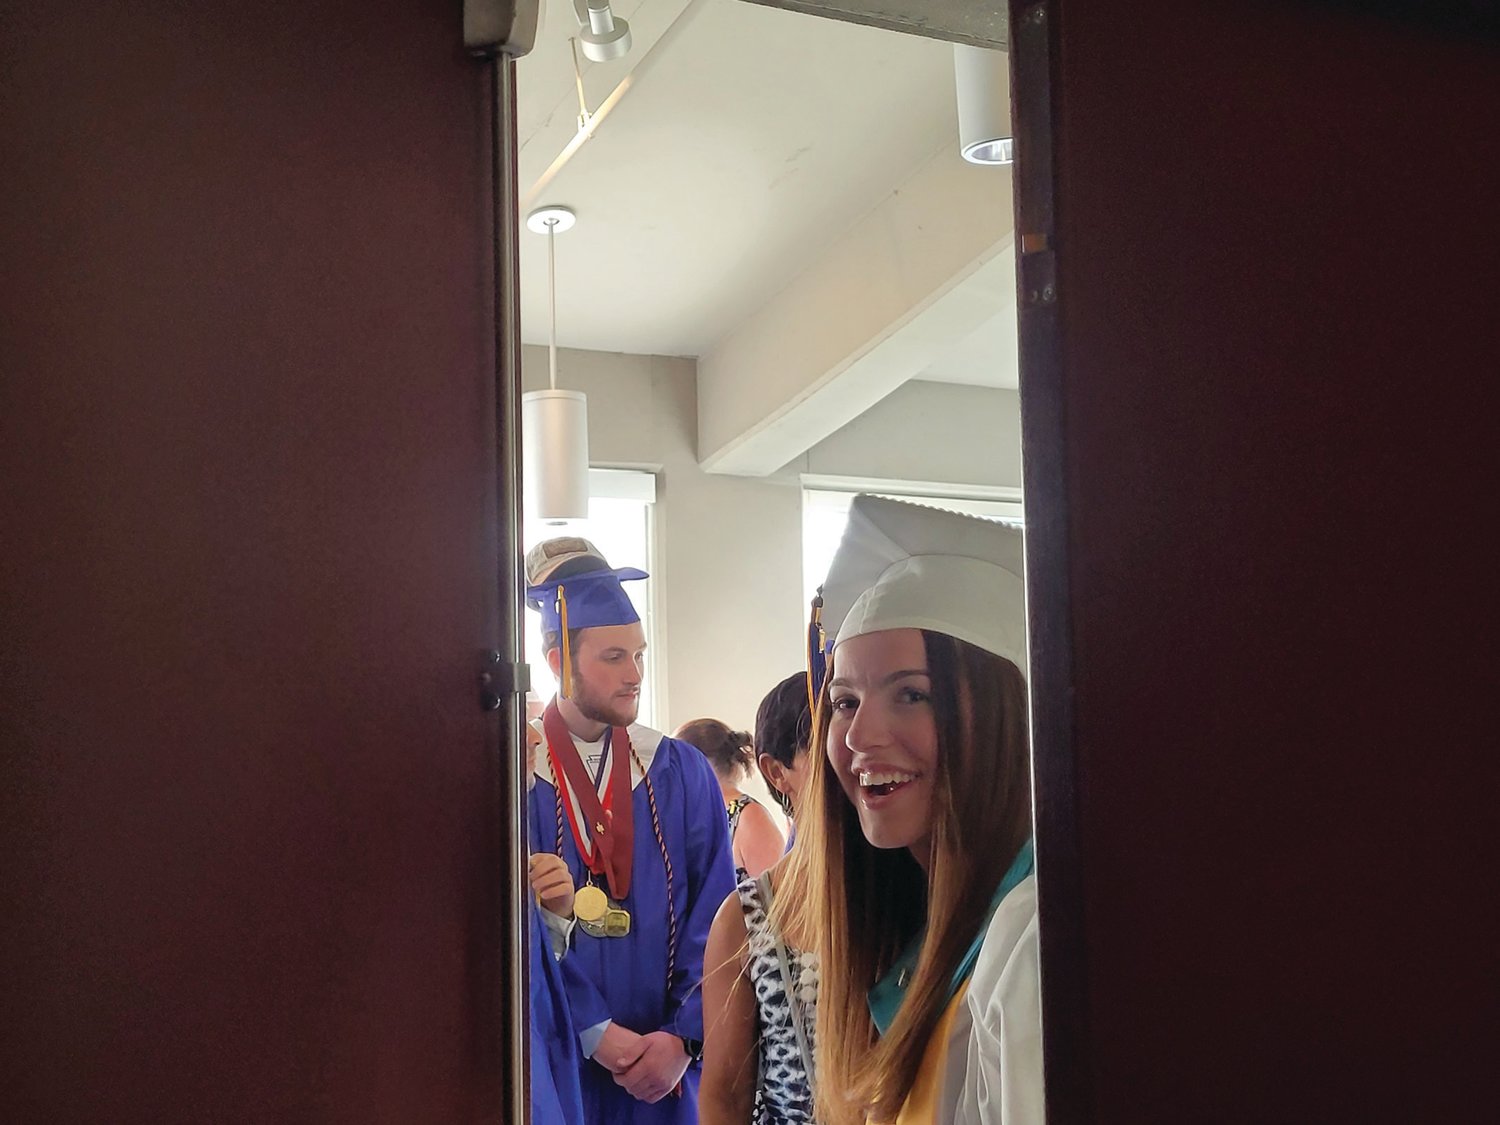 ANXIOUS GRADS: The Johnston Senior High School Class of 2022 lined up in a hallway behind the scenes of the ceremony held Friday at Veterans Memorial Auditorium in Providence. Students peaked through a doorway prior to their procession into the theater.